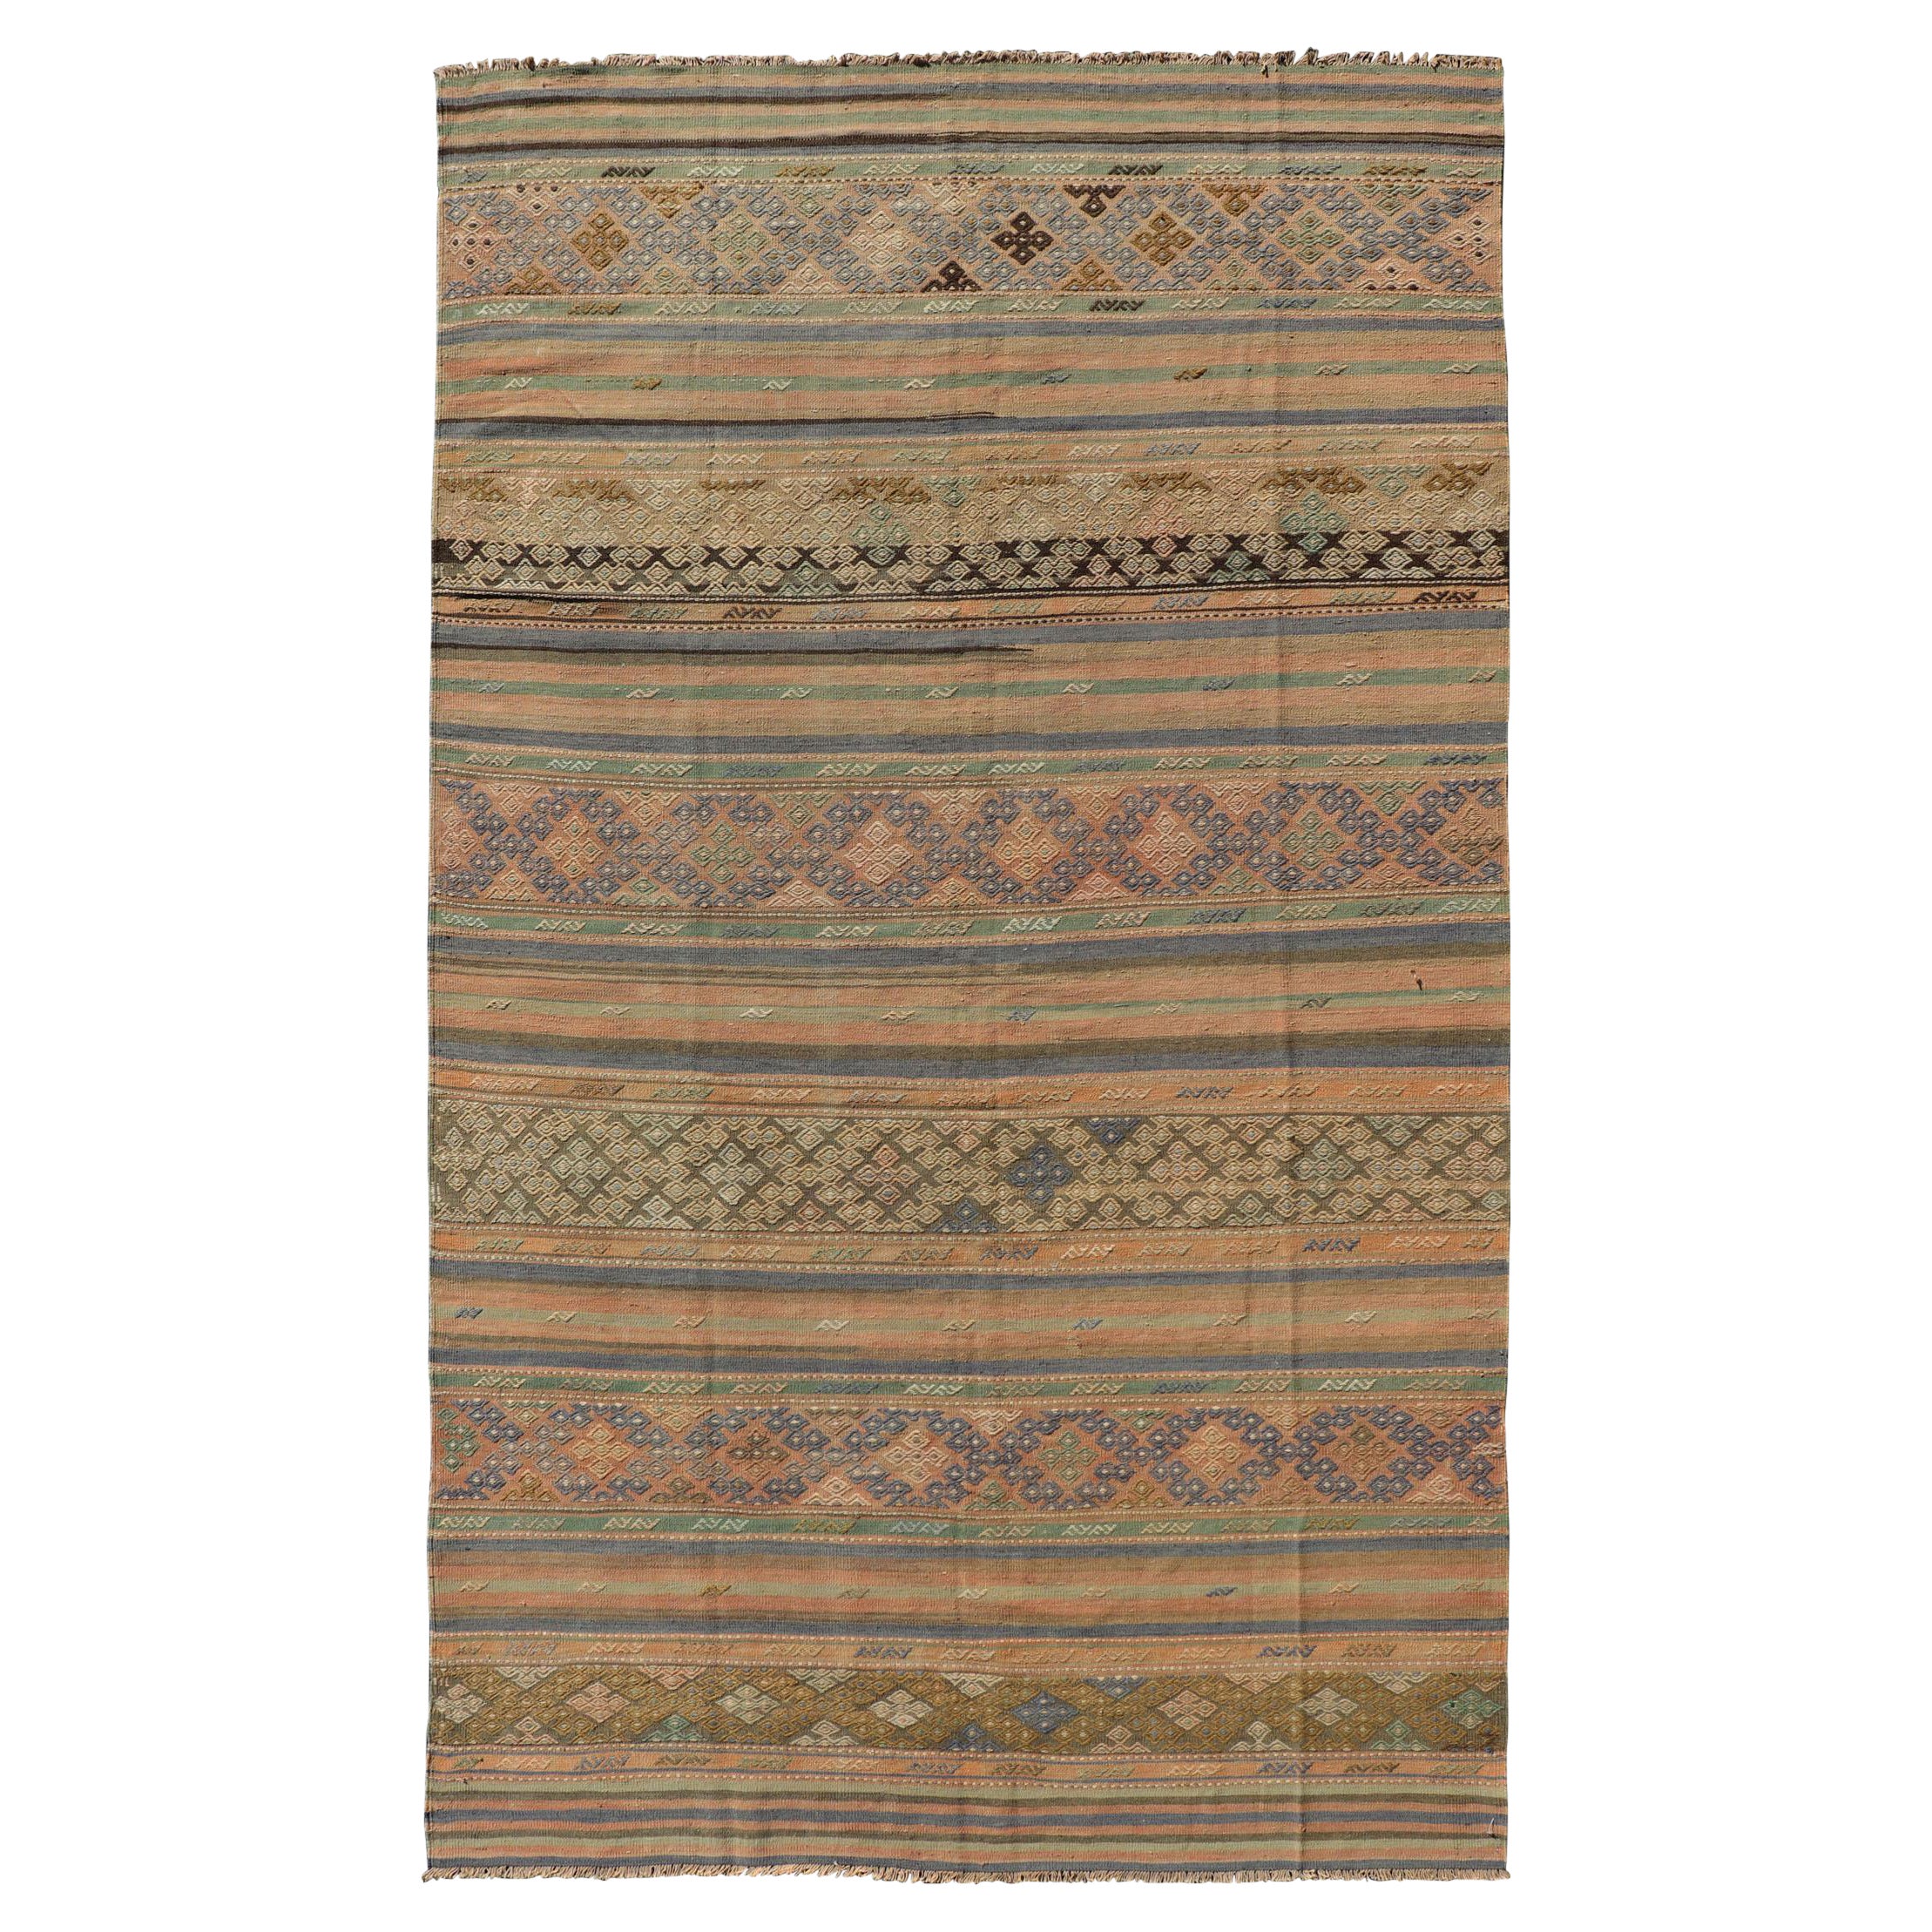 Vintage Striped Turkish Kilim Rug with Geometric Shapes and Soft Muted Colors